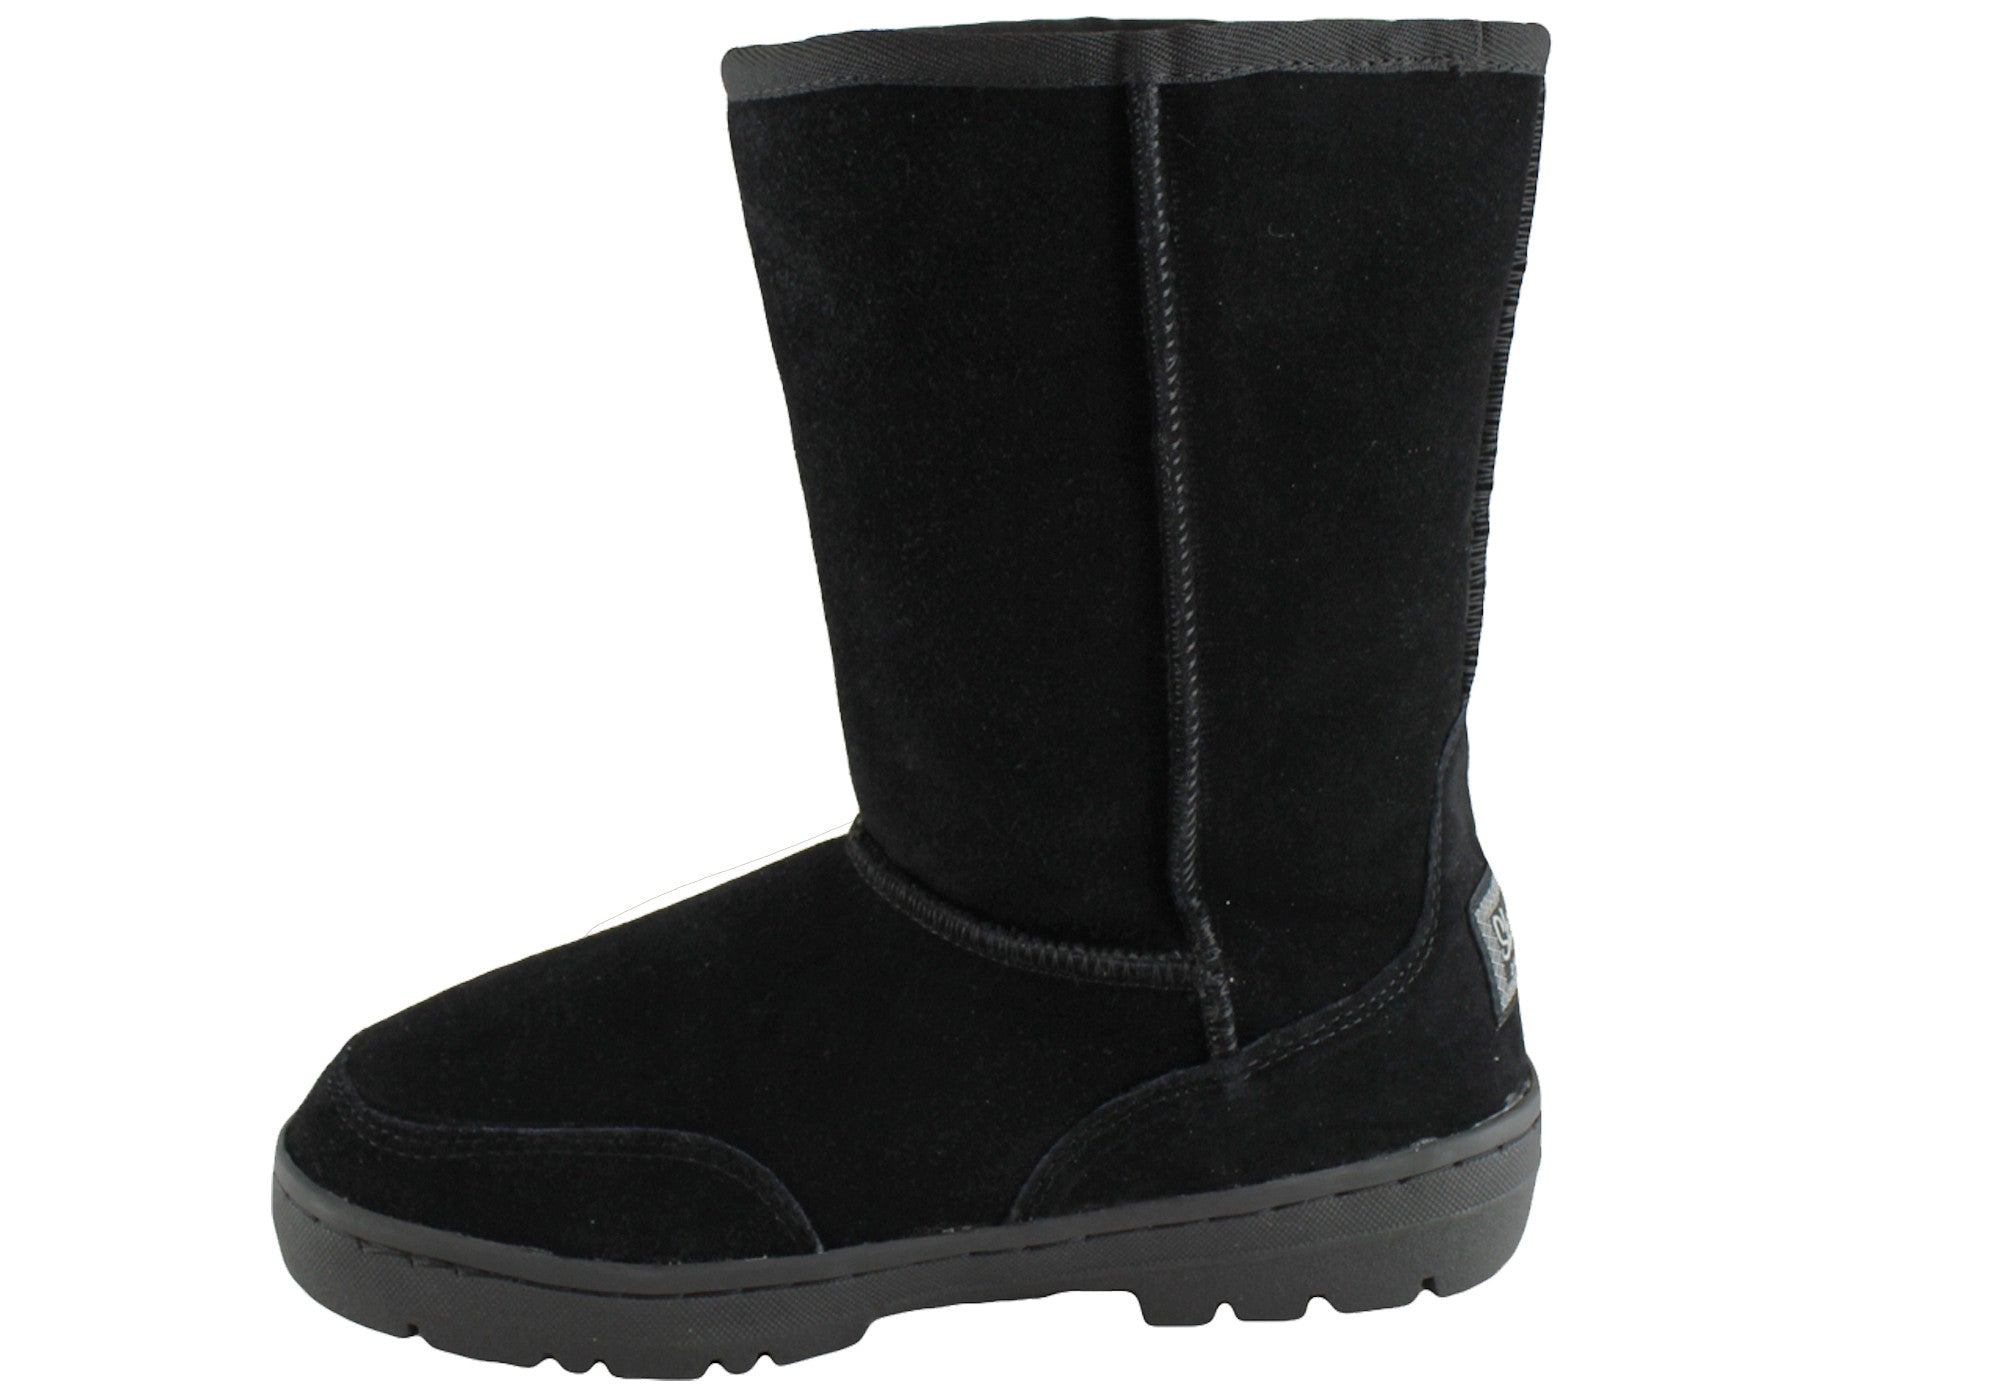 NEW SKECHERS SOUVENIRS WOMENS WARM ANKLE BOOTS | eBay